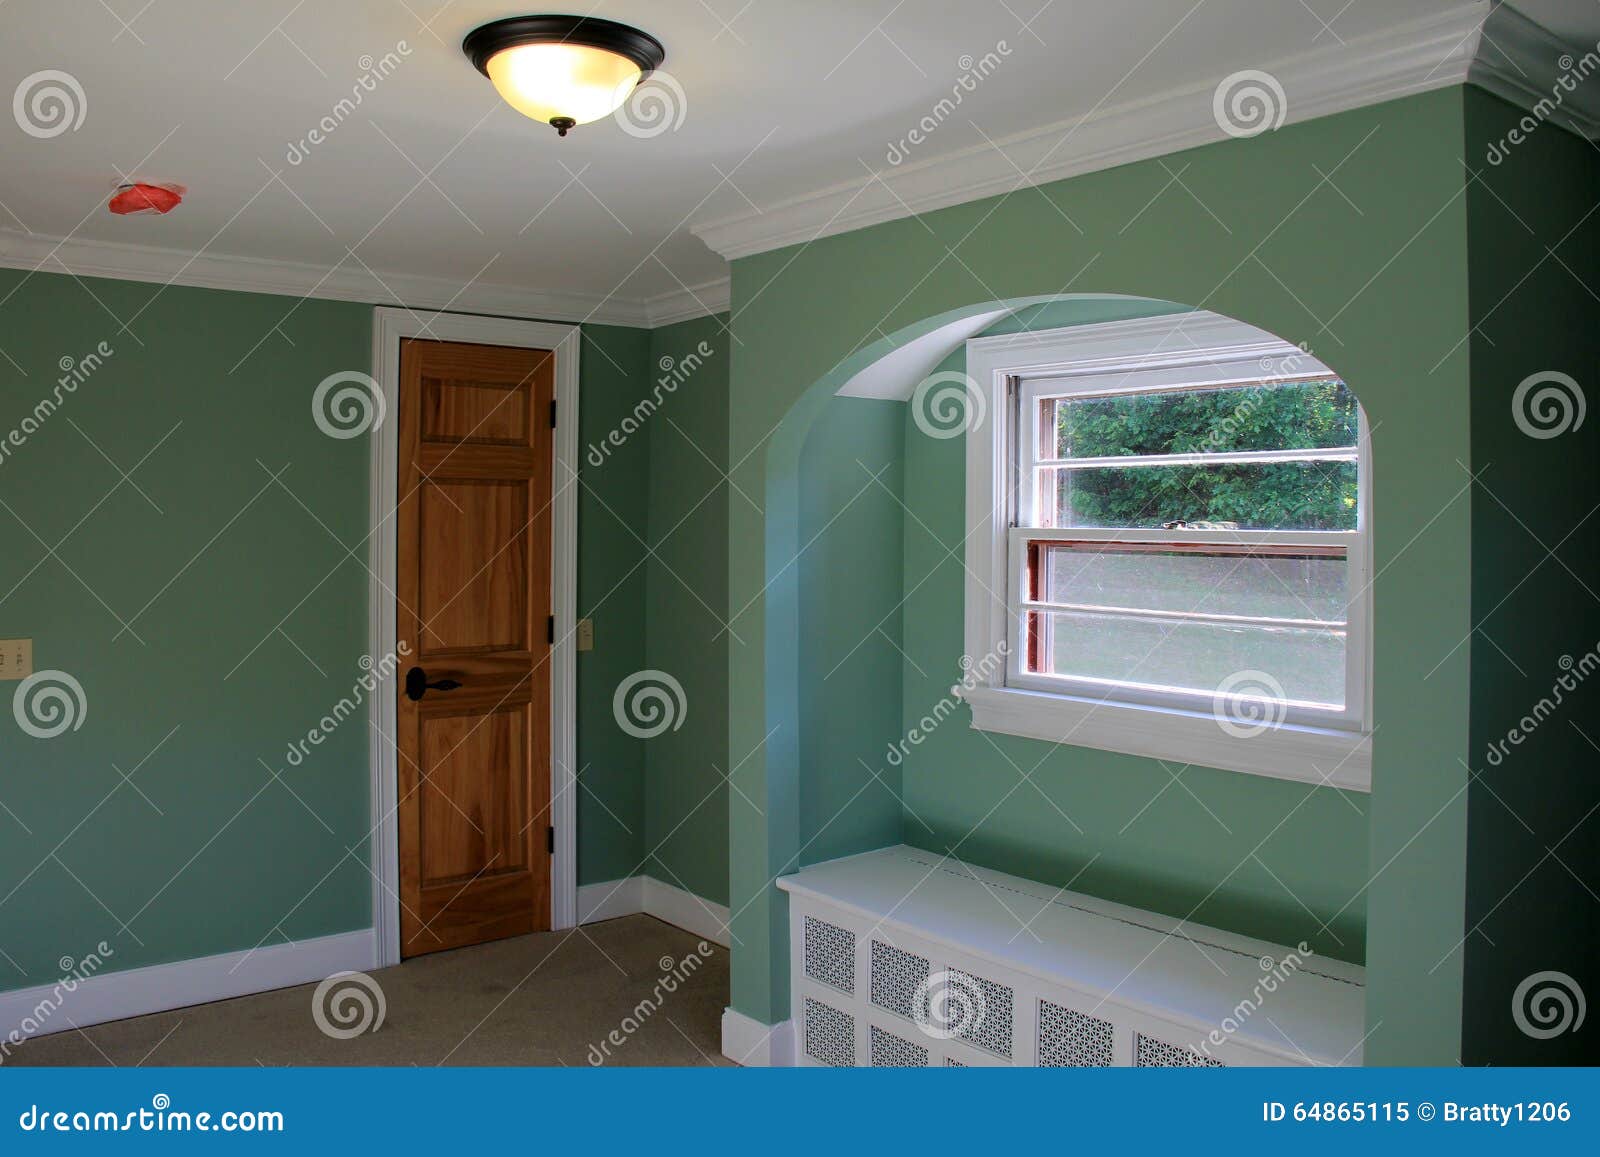 Colorful Light Green Paint On Walls Of New Interior Home